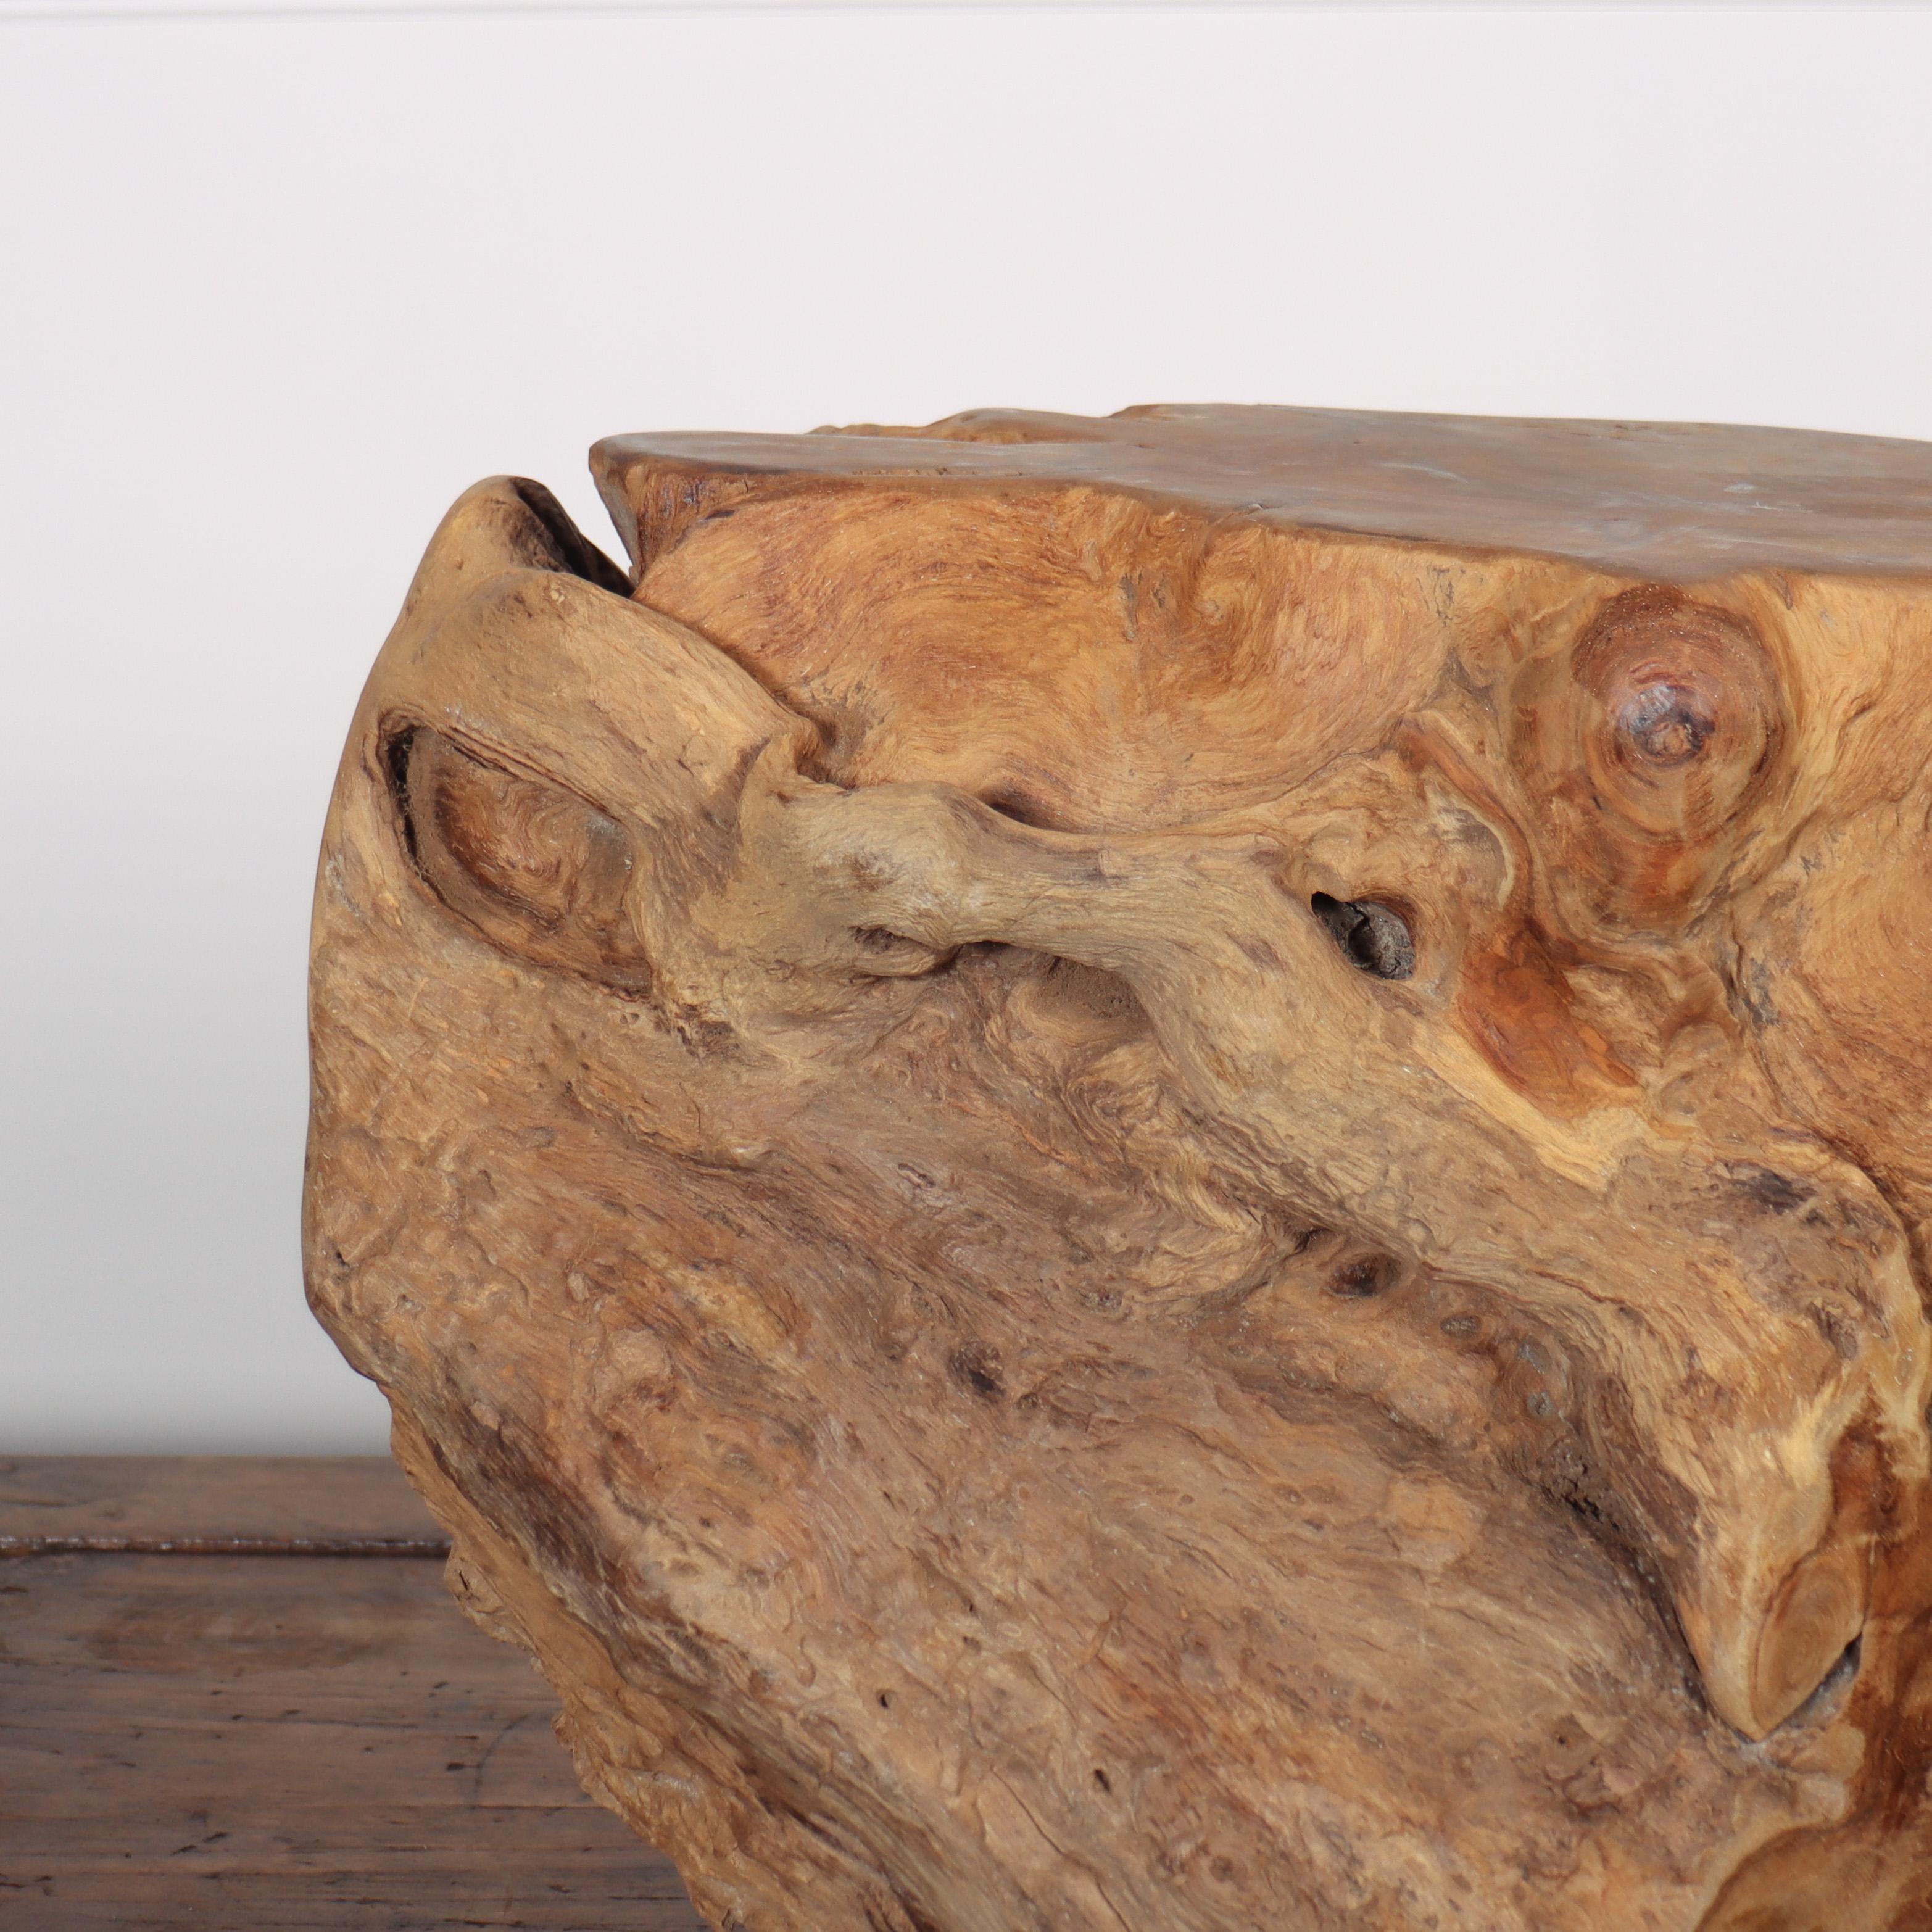 Sculptural rustic root side table.

Ref: B.

Reference: 8145

Dimensions
22 inches (56 cms) Wide
17 inches (43 cms) Deep
19 inches (48 cms) High